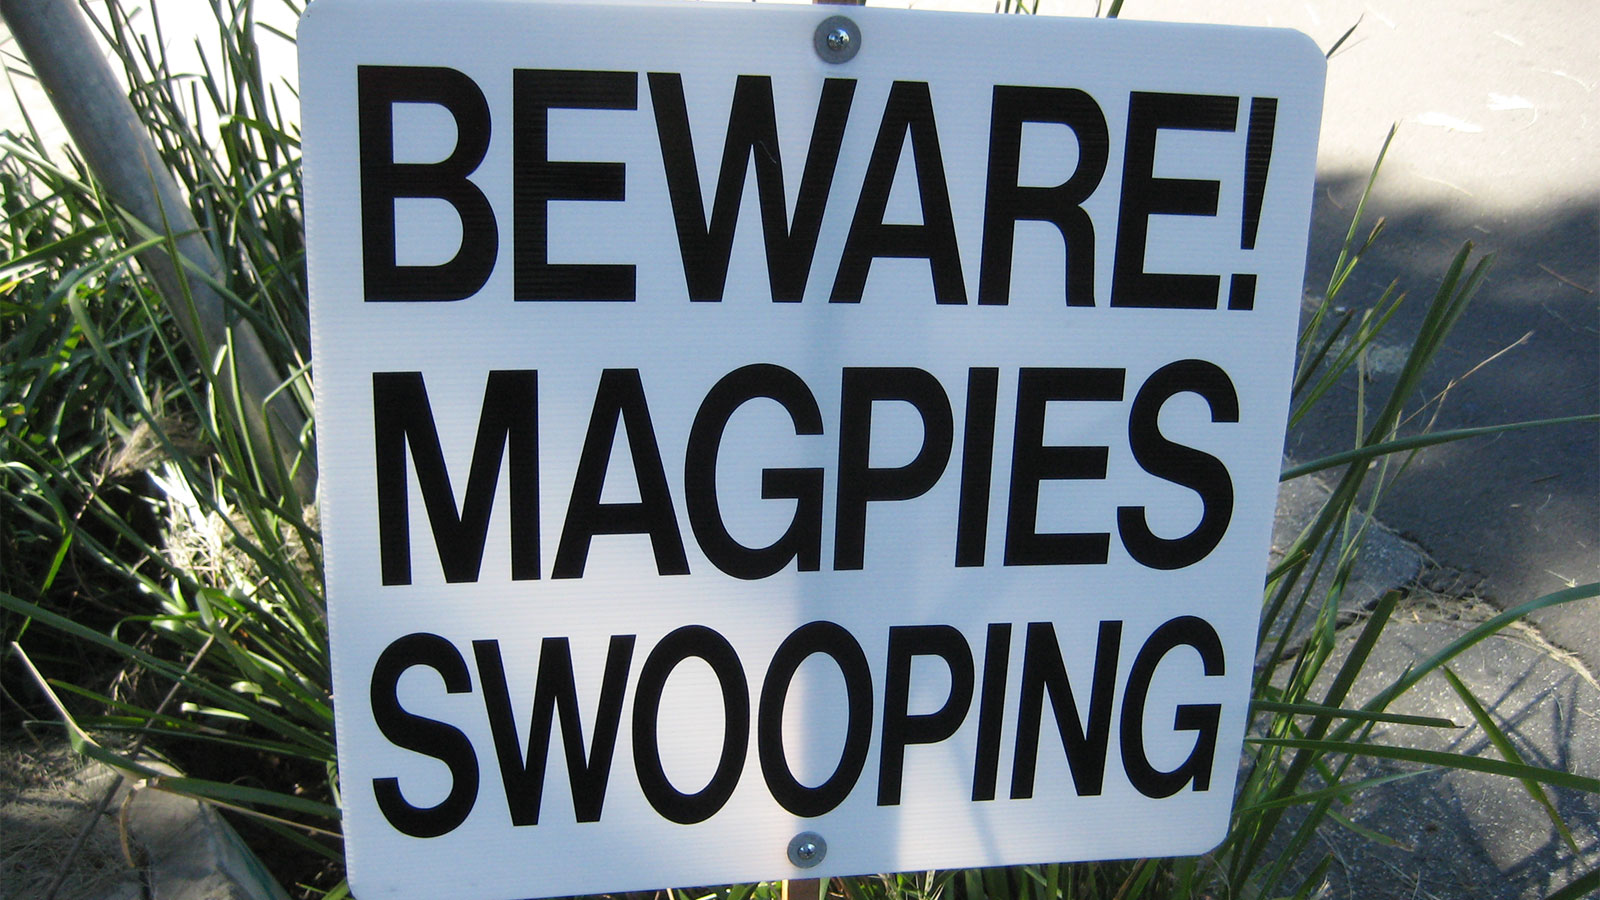 Beware magpies swooping sign